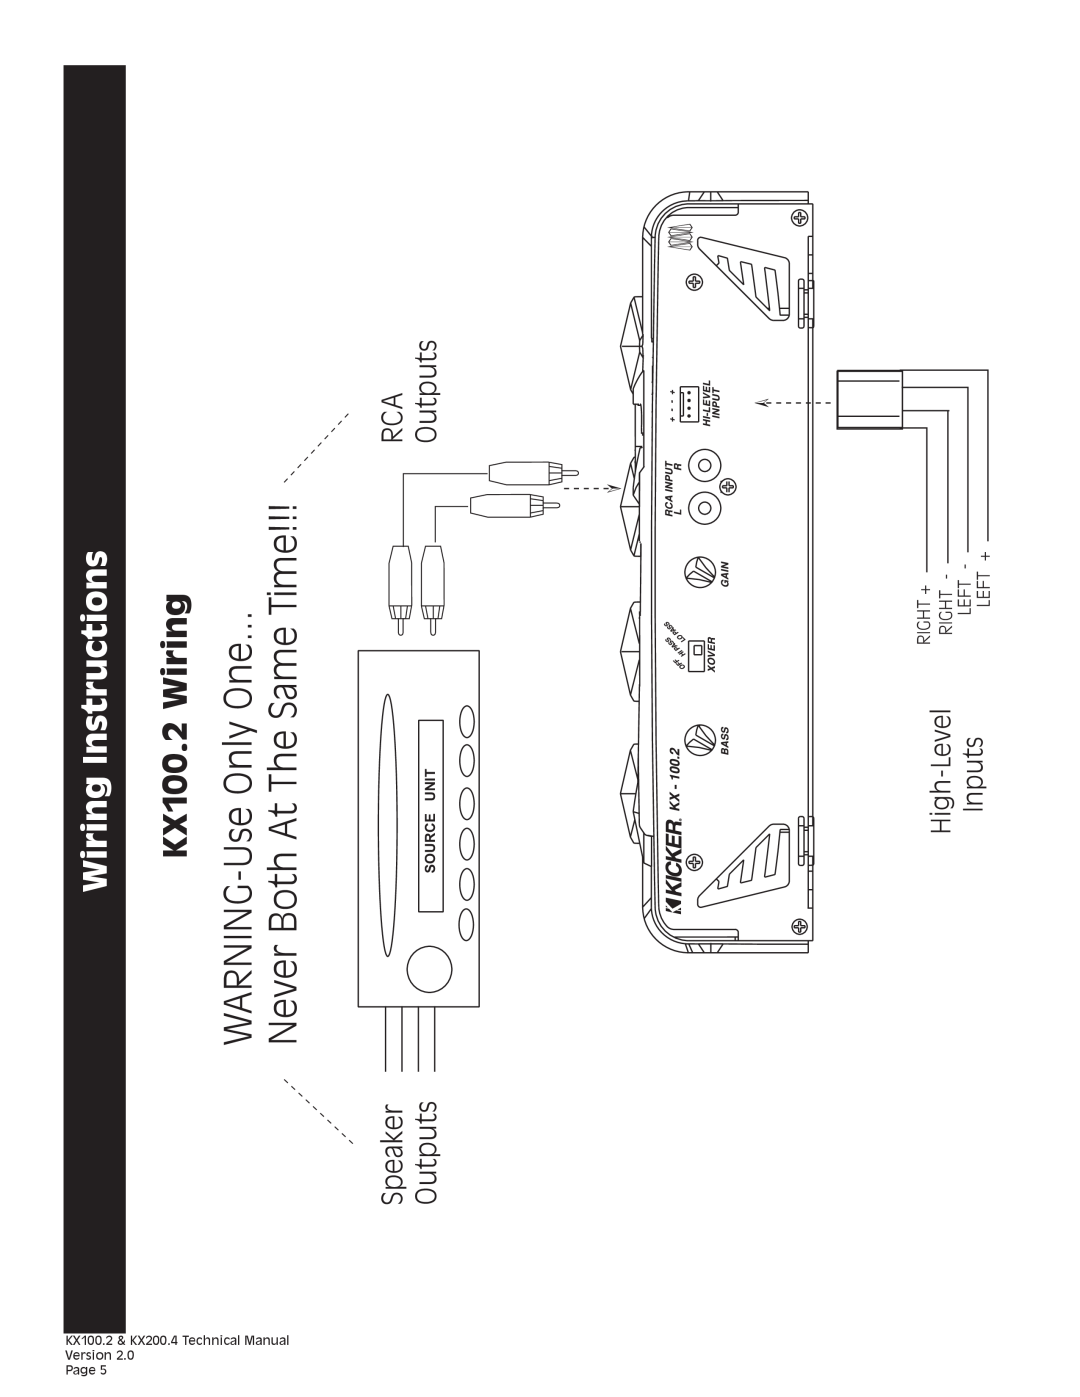 Kicker KX200.4 technical manual Wiring Instructions, KX100.2 Wiring, Outputs, Speaker, High-Level, Inputs, Source Unit 